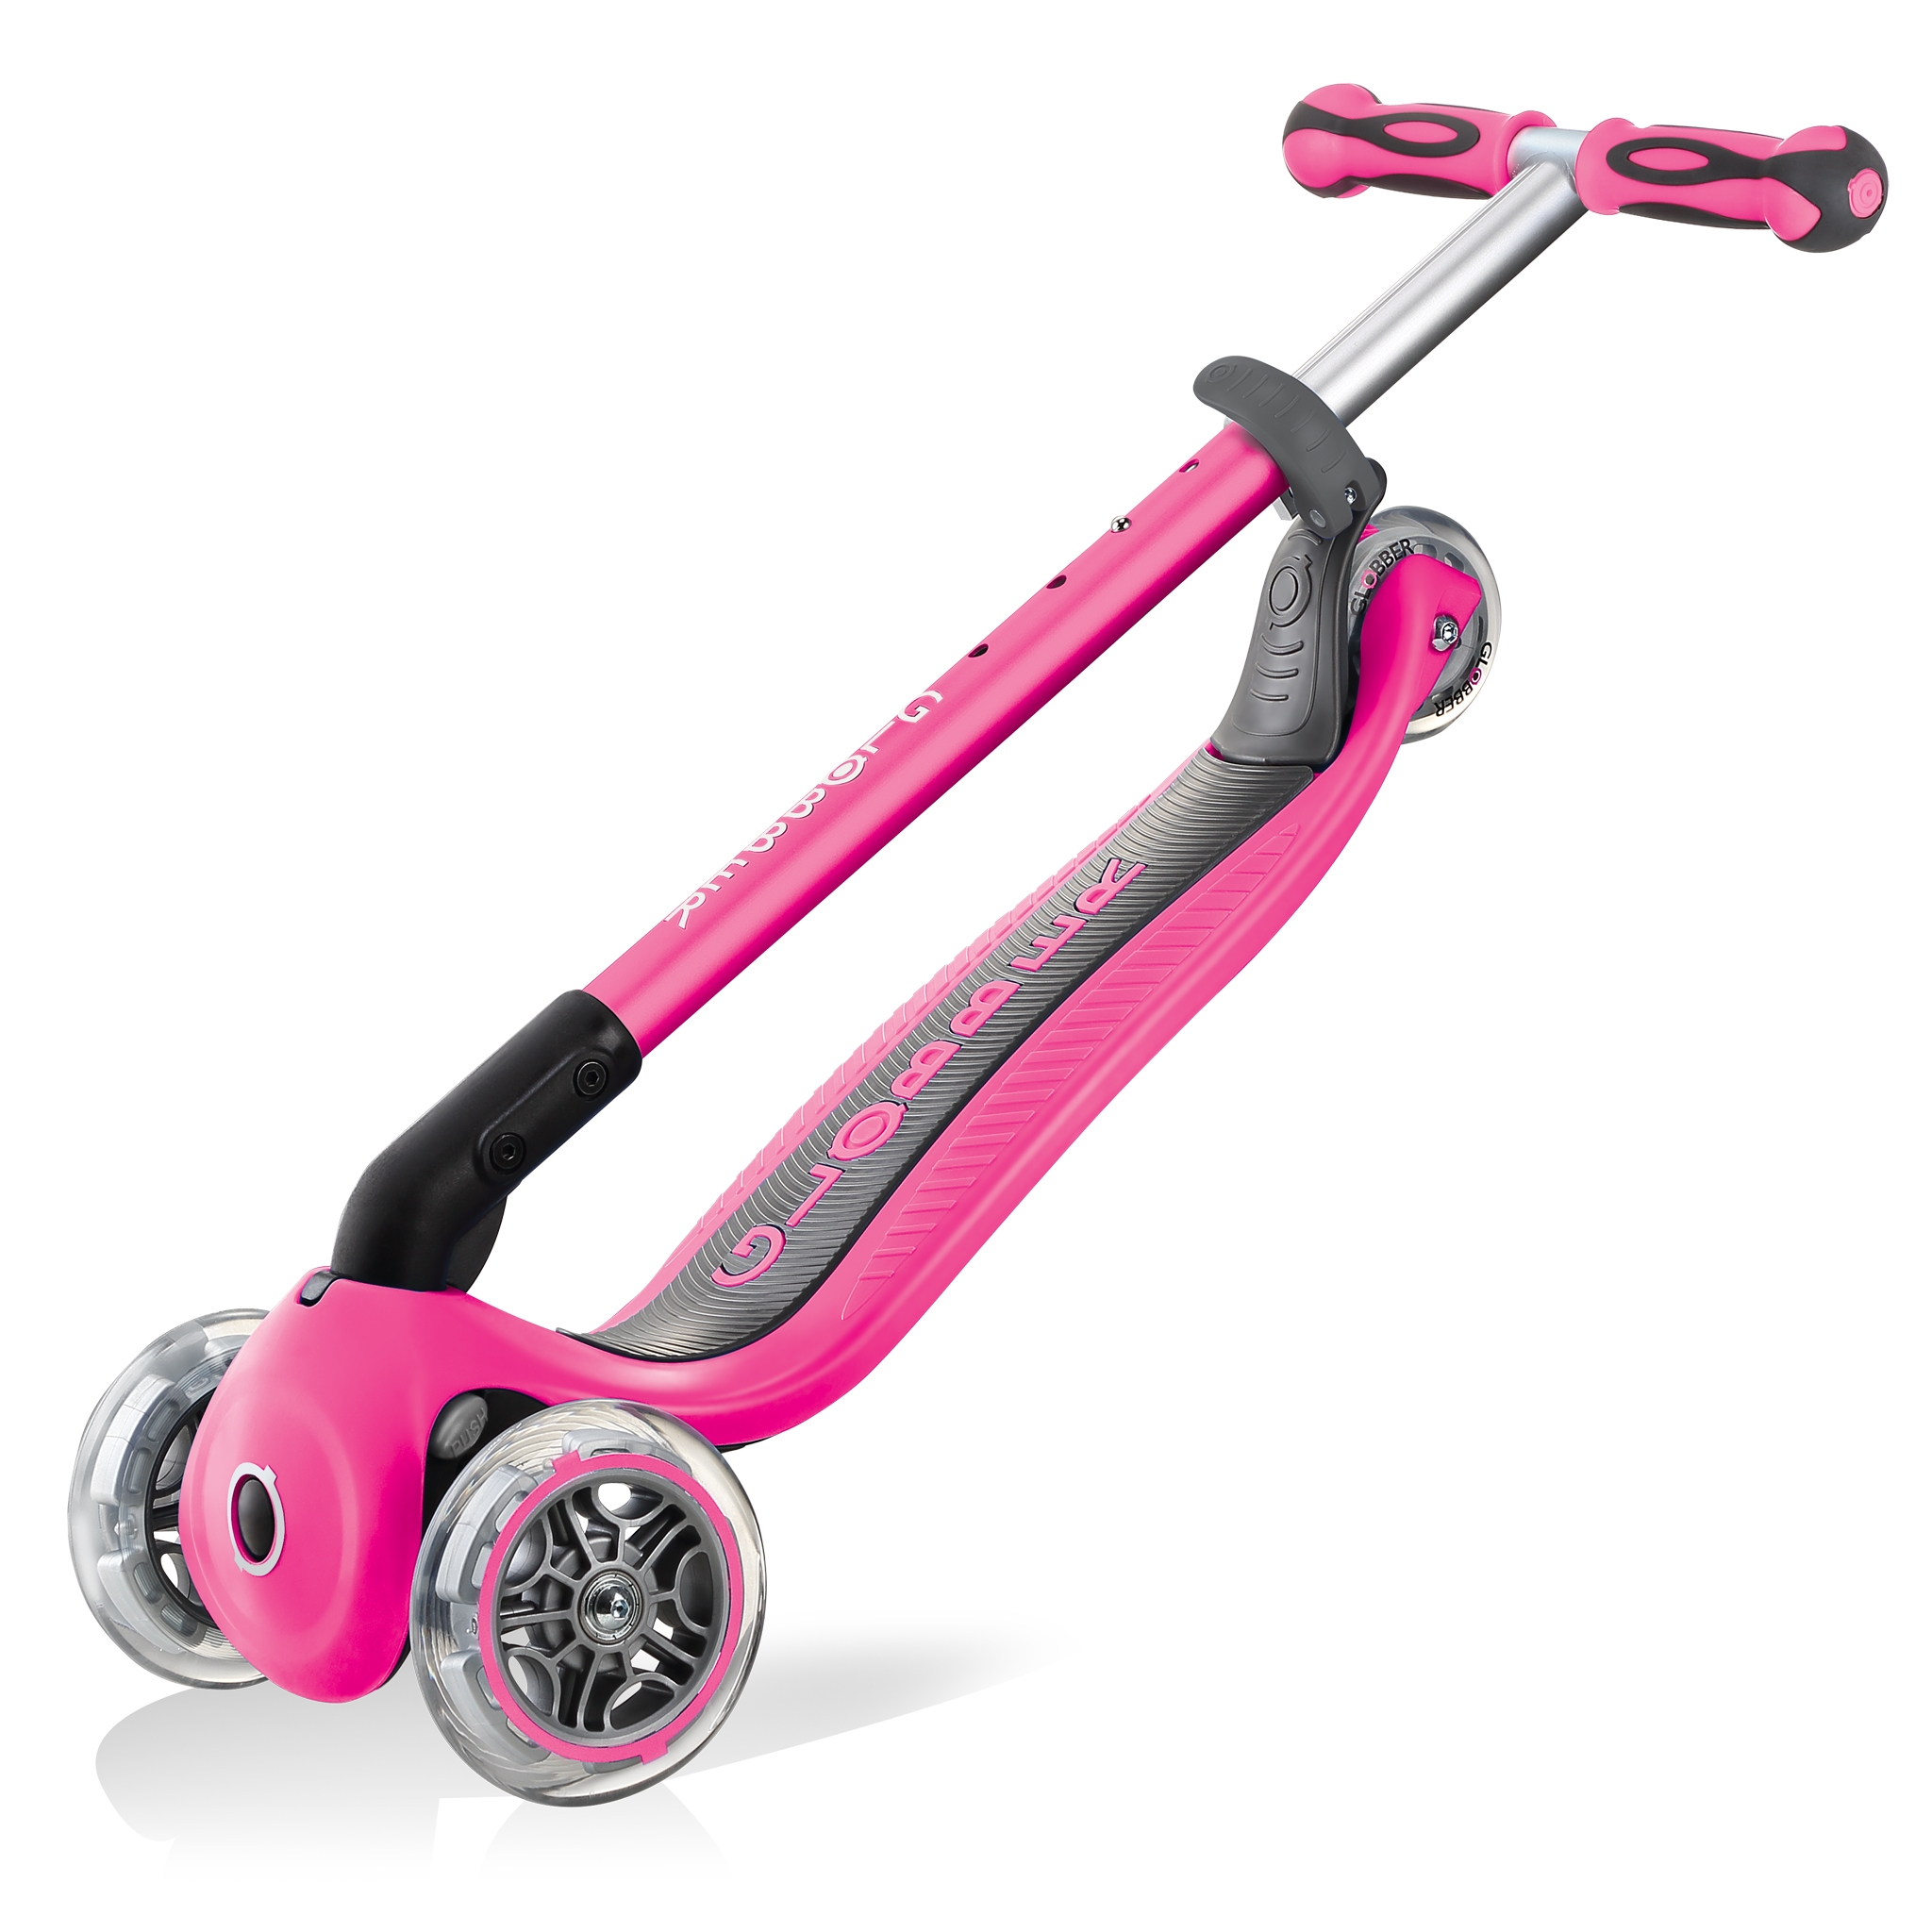 GO-UP-DELUXE-ride-on-walking-bike-scooter-trolley-mode-compatible-deep-pink 5